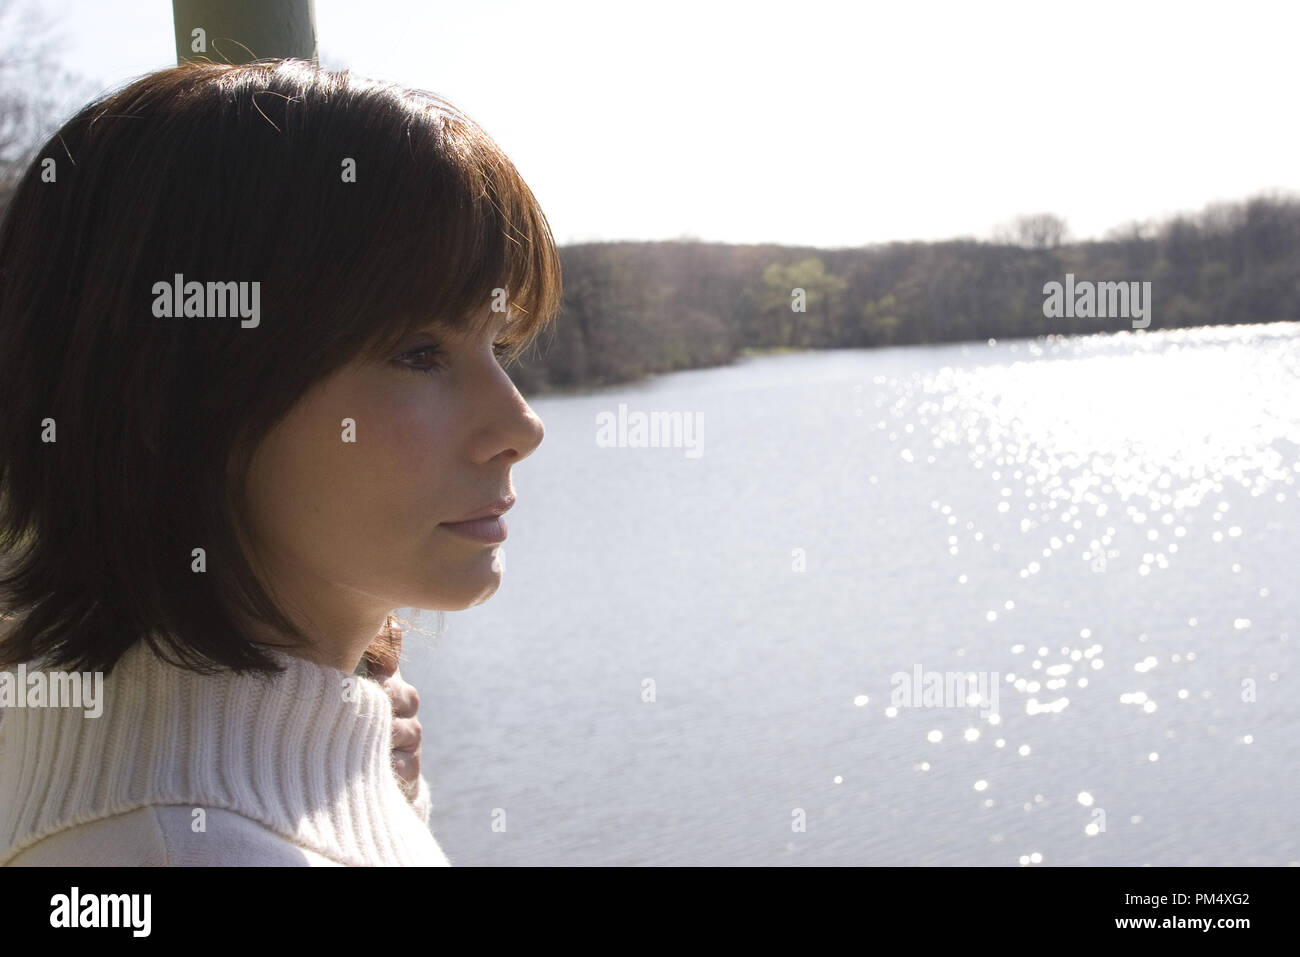 Studio Publicity Still from 'The Lake House' Sandra Bullock © 2006 Warner Photo credit: Peter Sorel  File Reference # 307372514THA  For Editorial Use Only -  All Rights Reserved Stock Photo